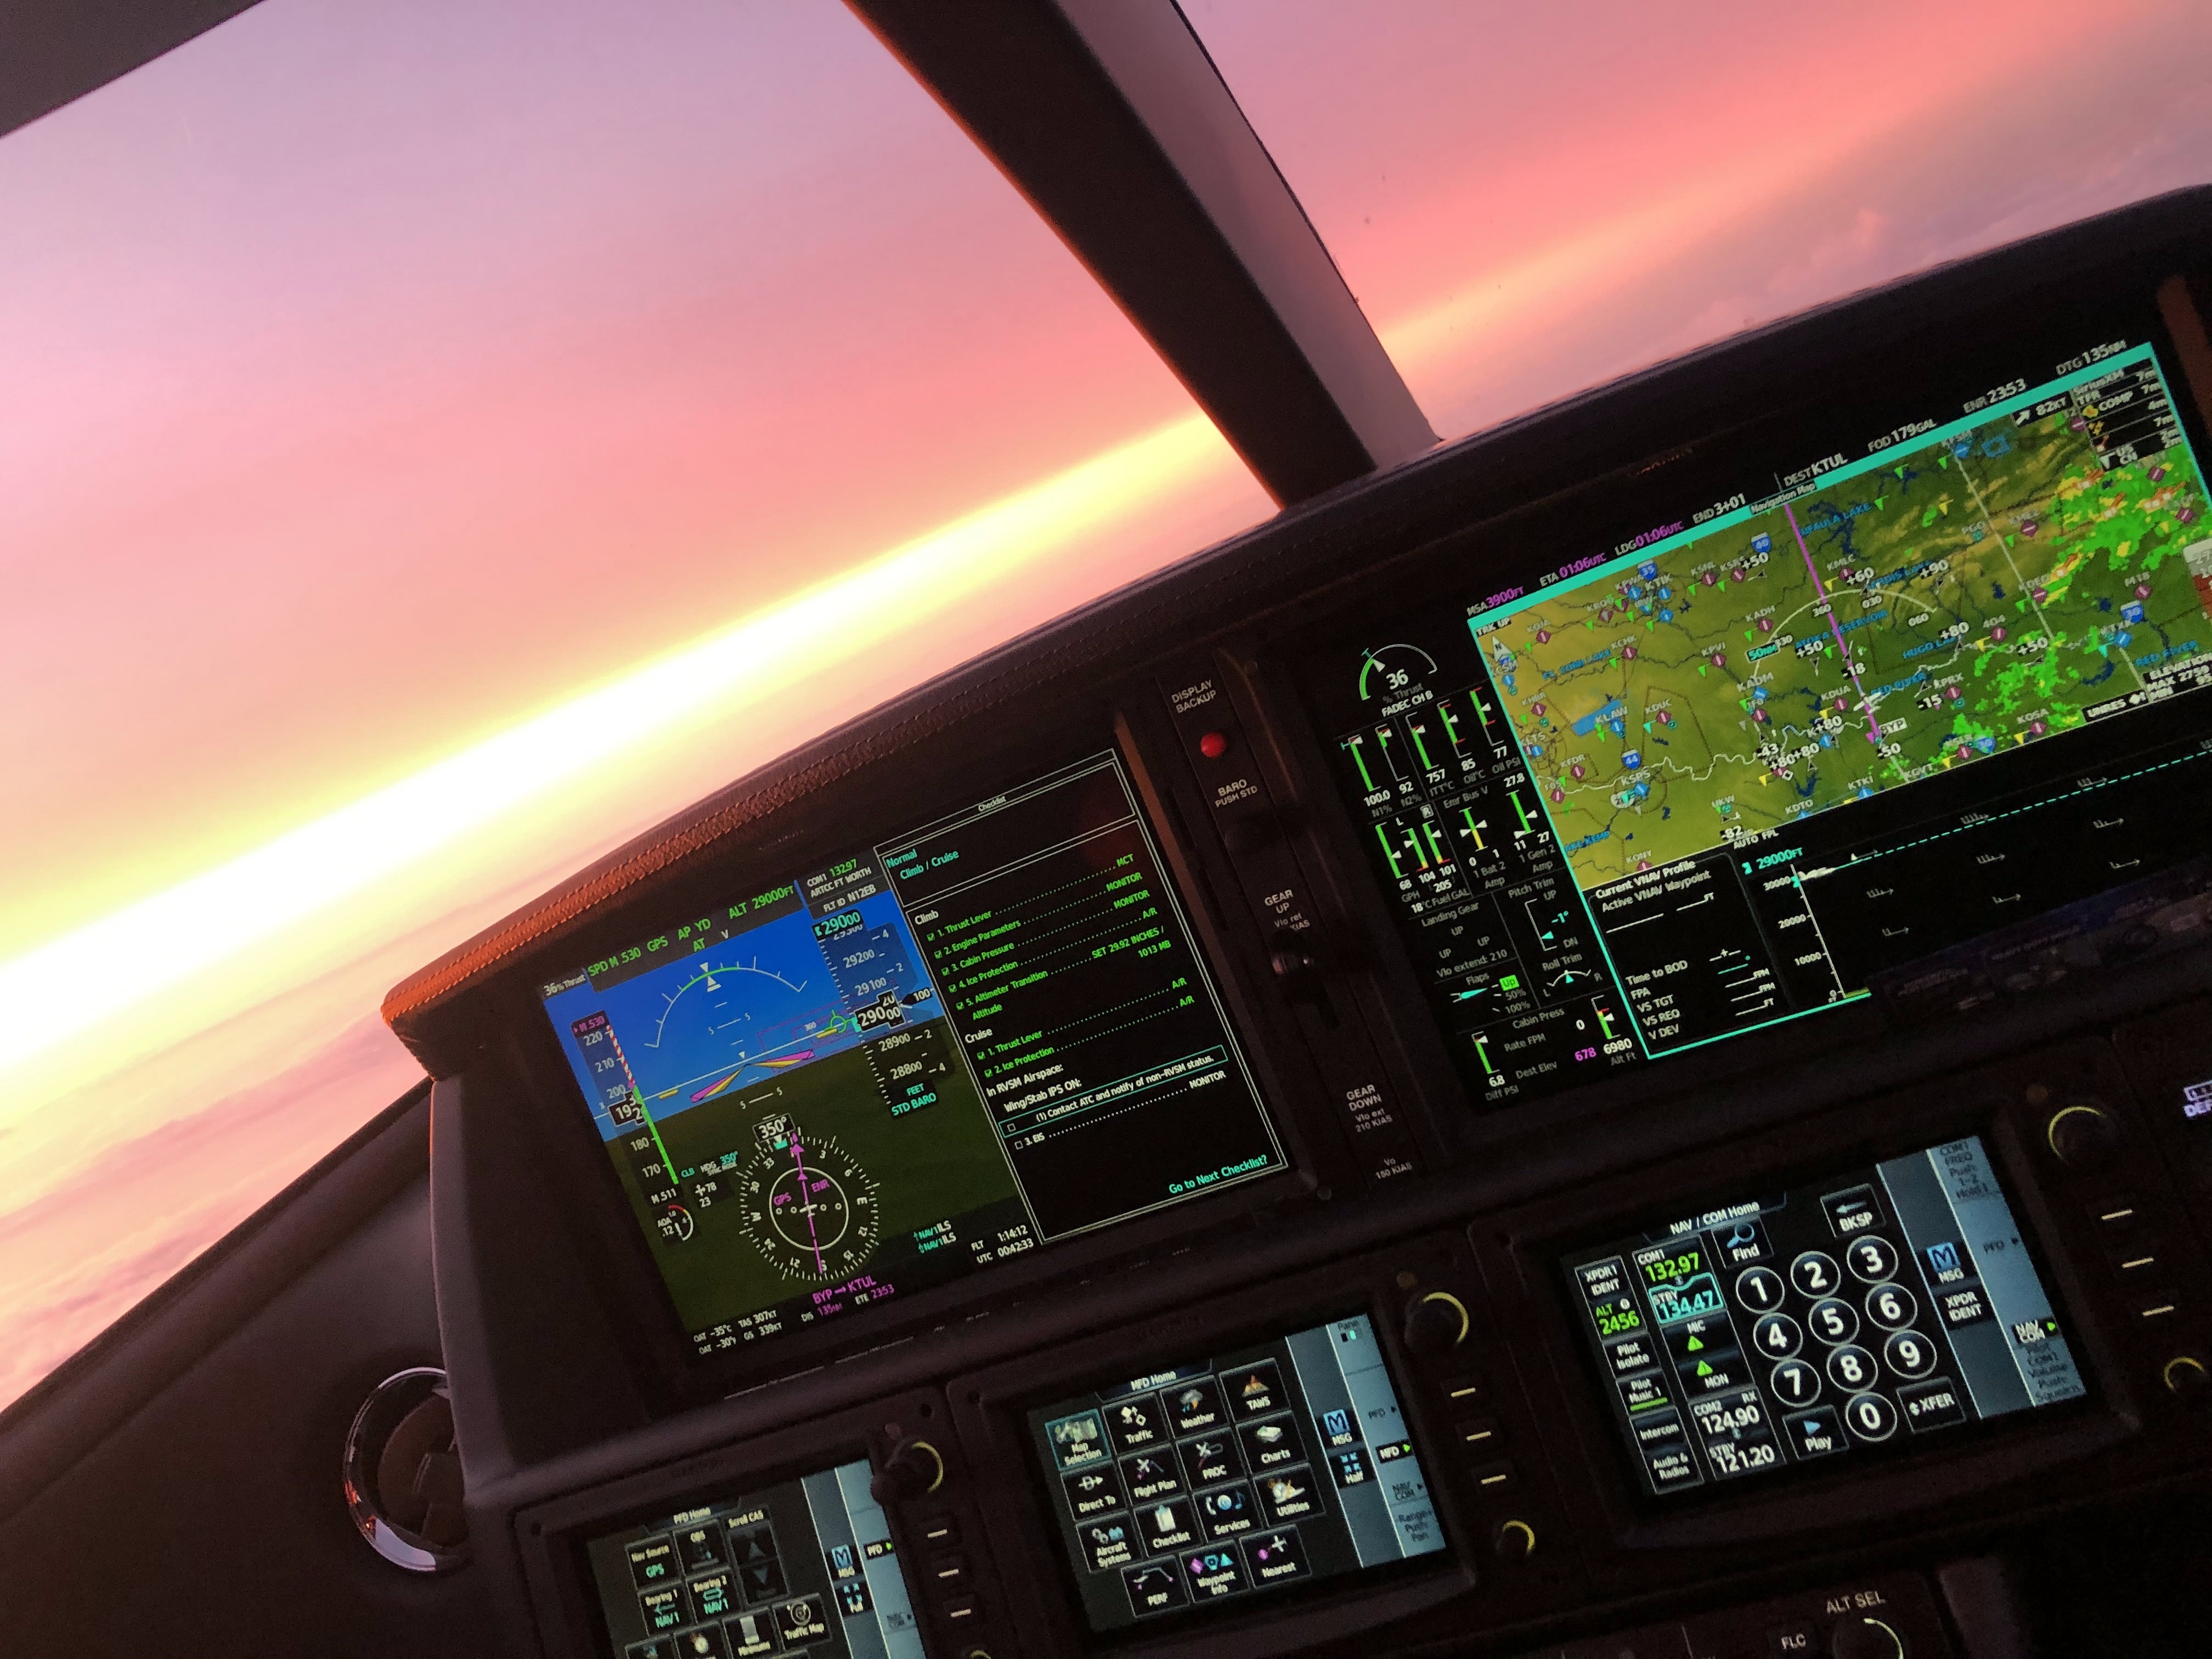 Avionics of the Cirrus Vision Jet and sunset over Texas at 29,000 feet and 307 Kt